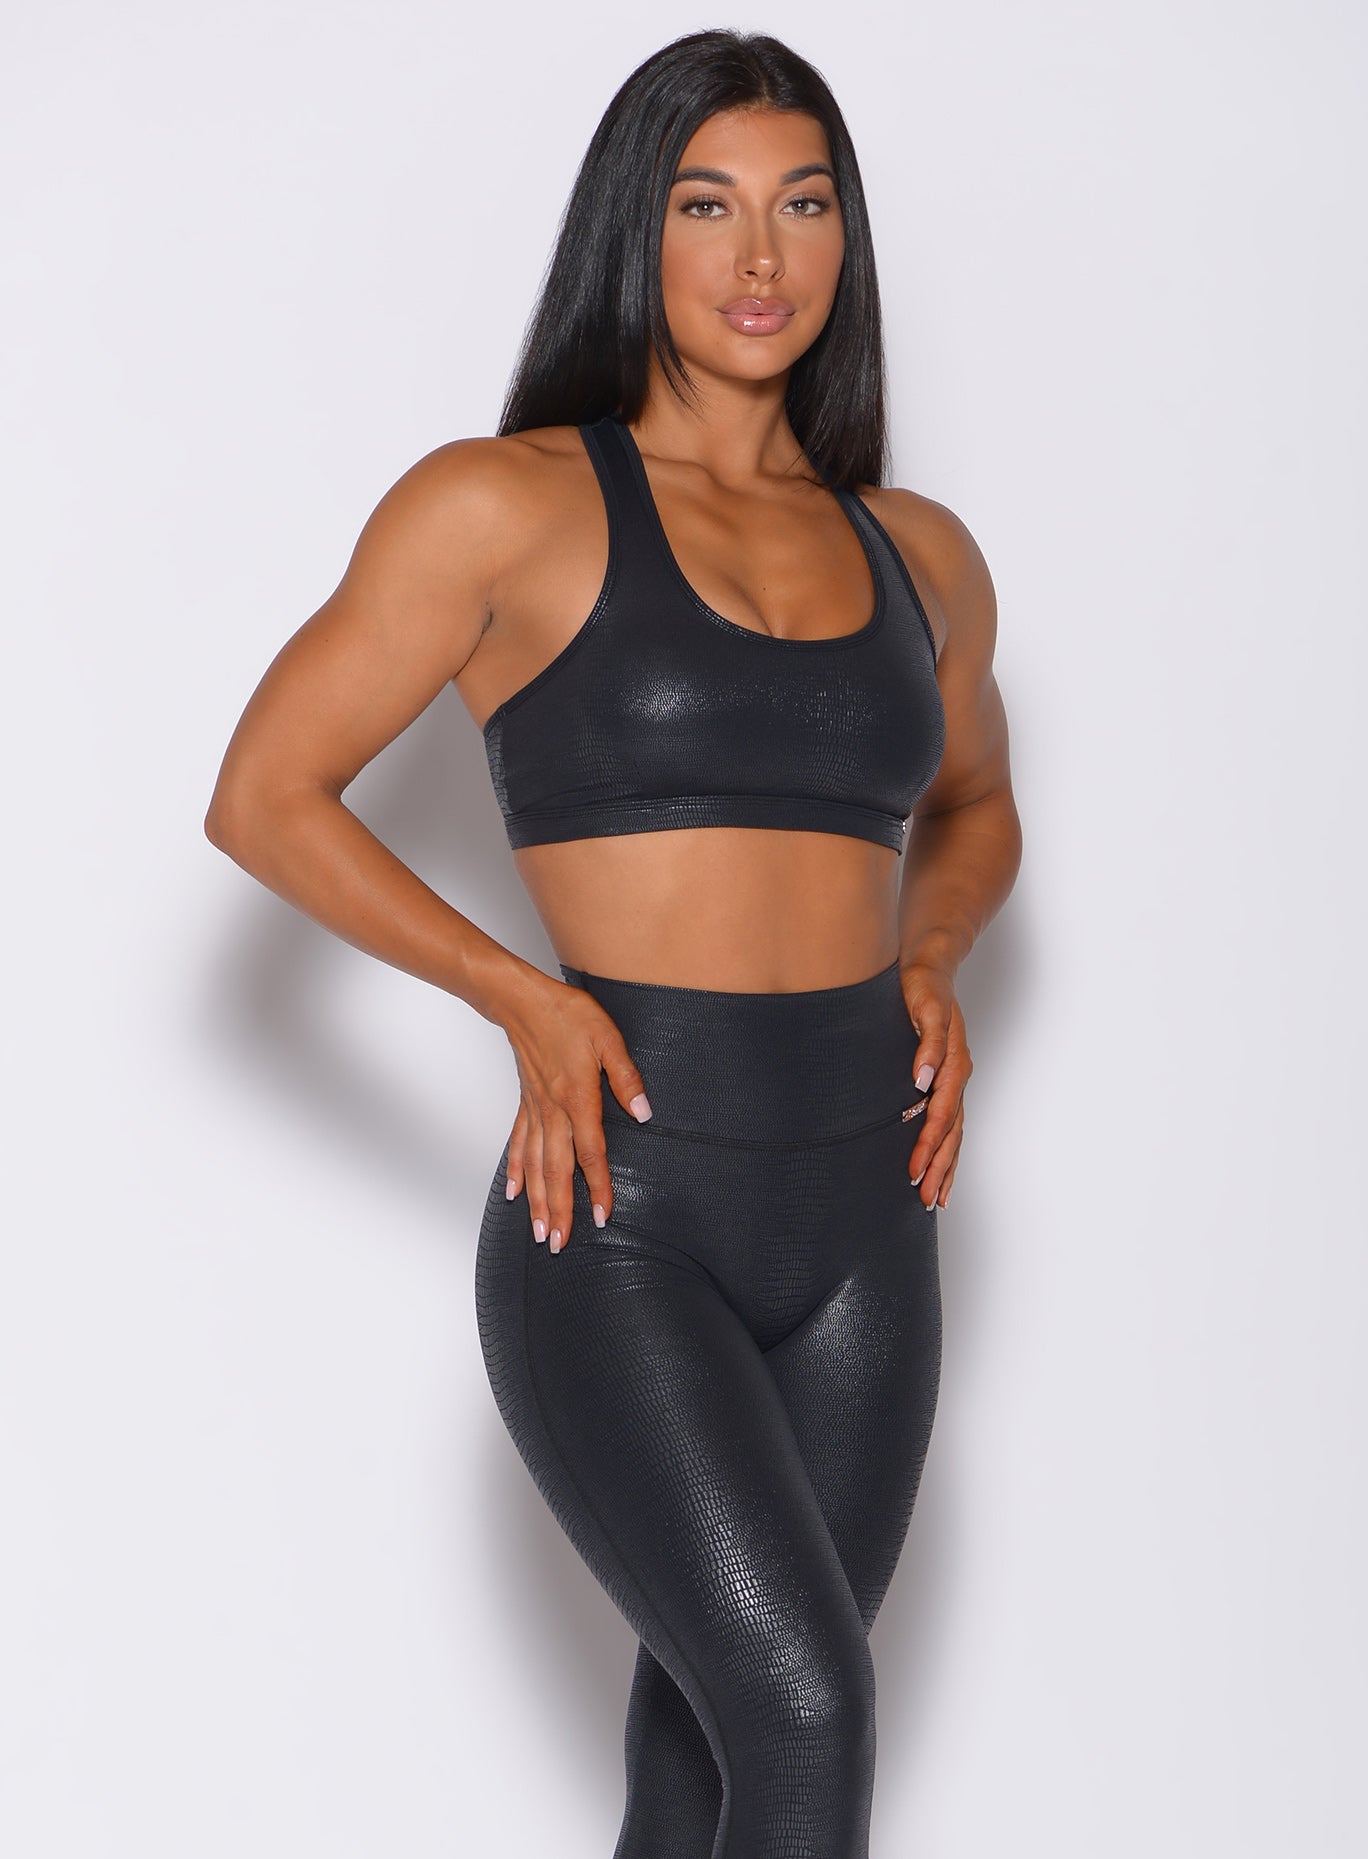 Right side profile view of a model angled right wearing our shine sports bra in black python color and a matching black leggings